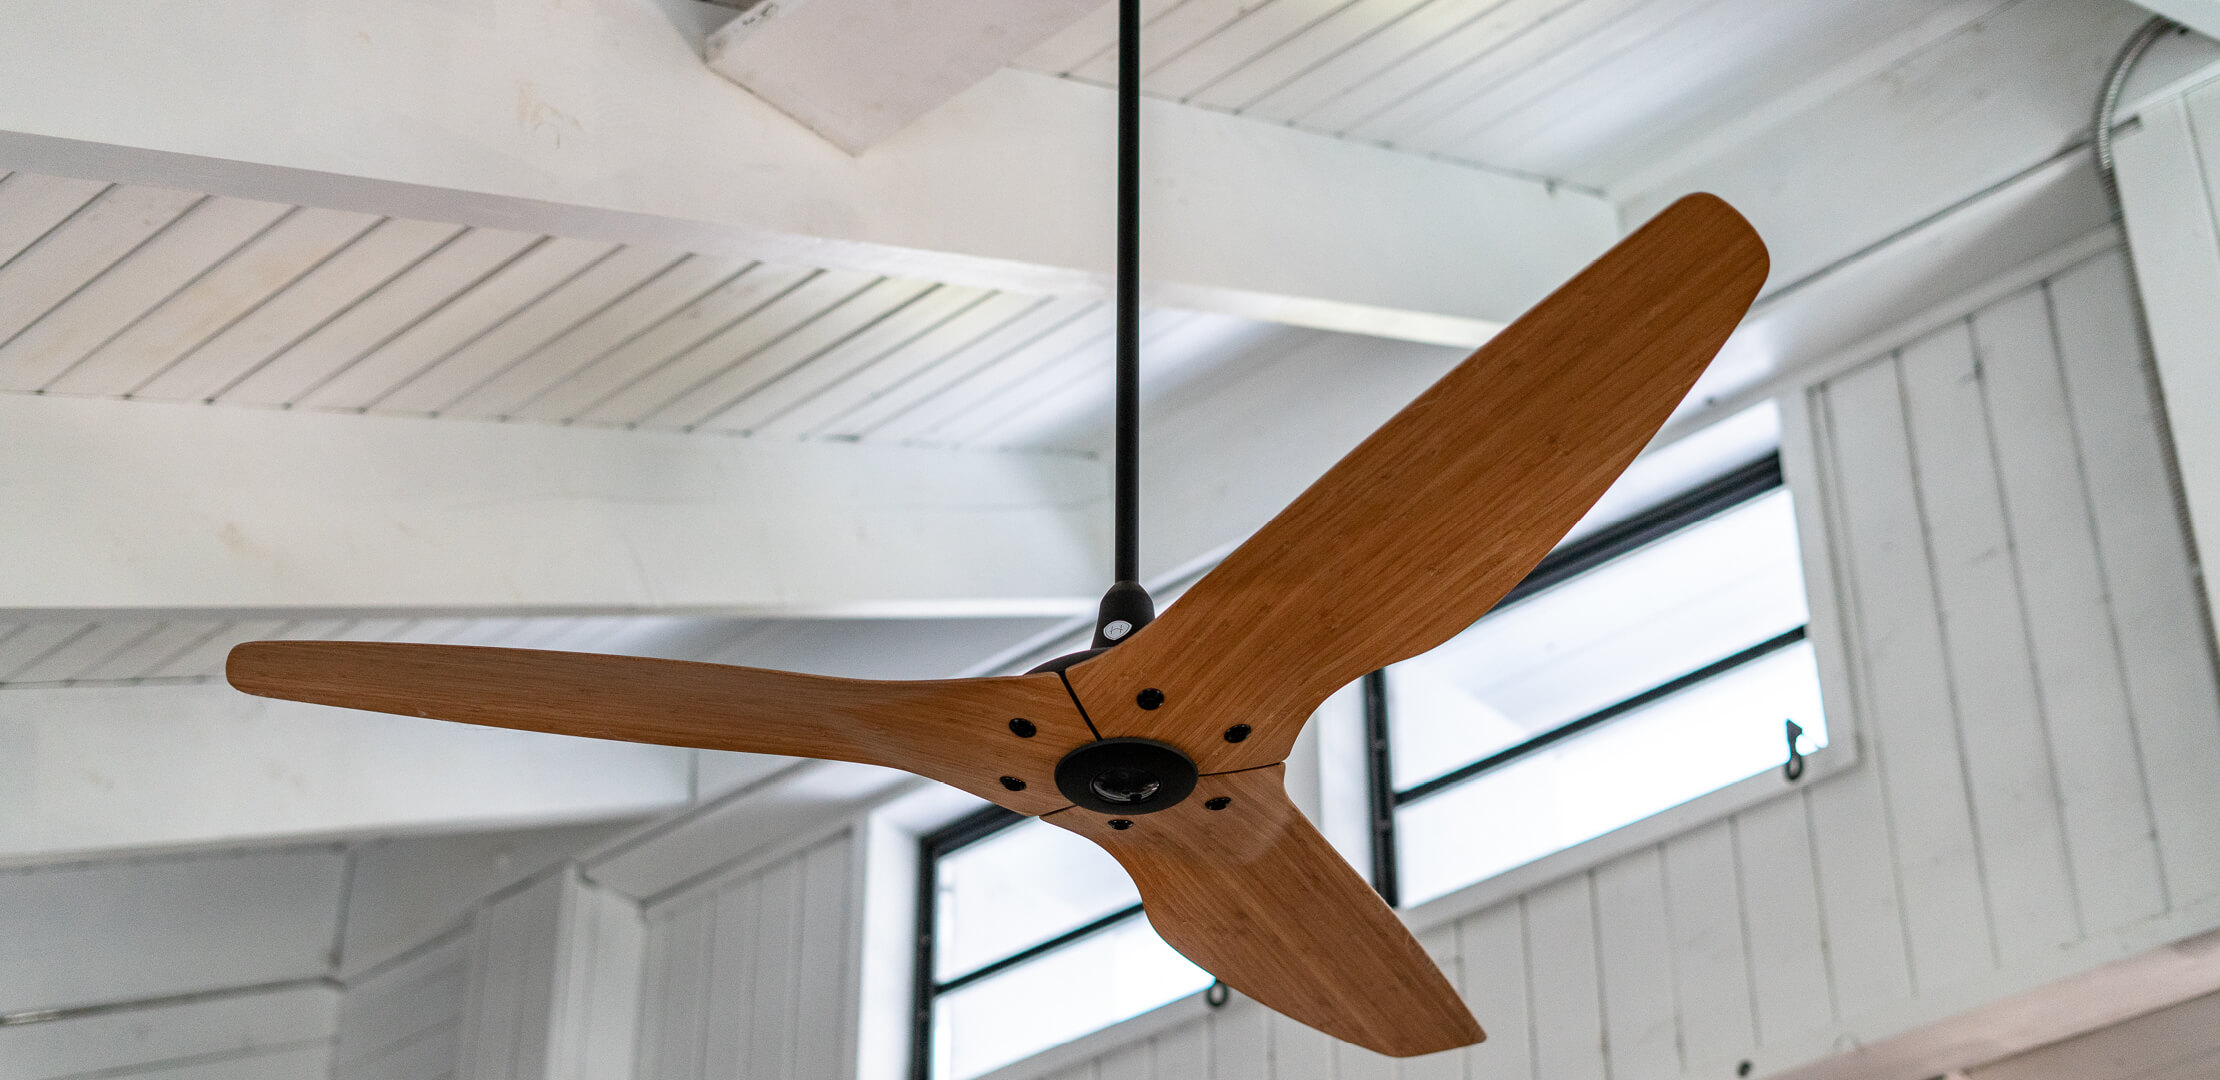 A modern wooden ceiling fan with three blades